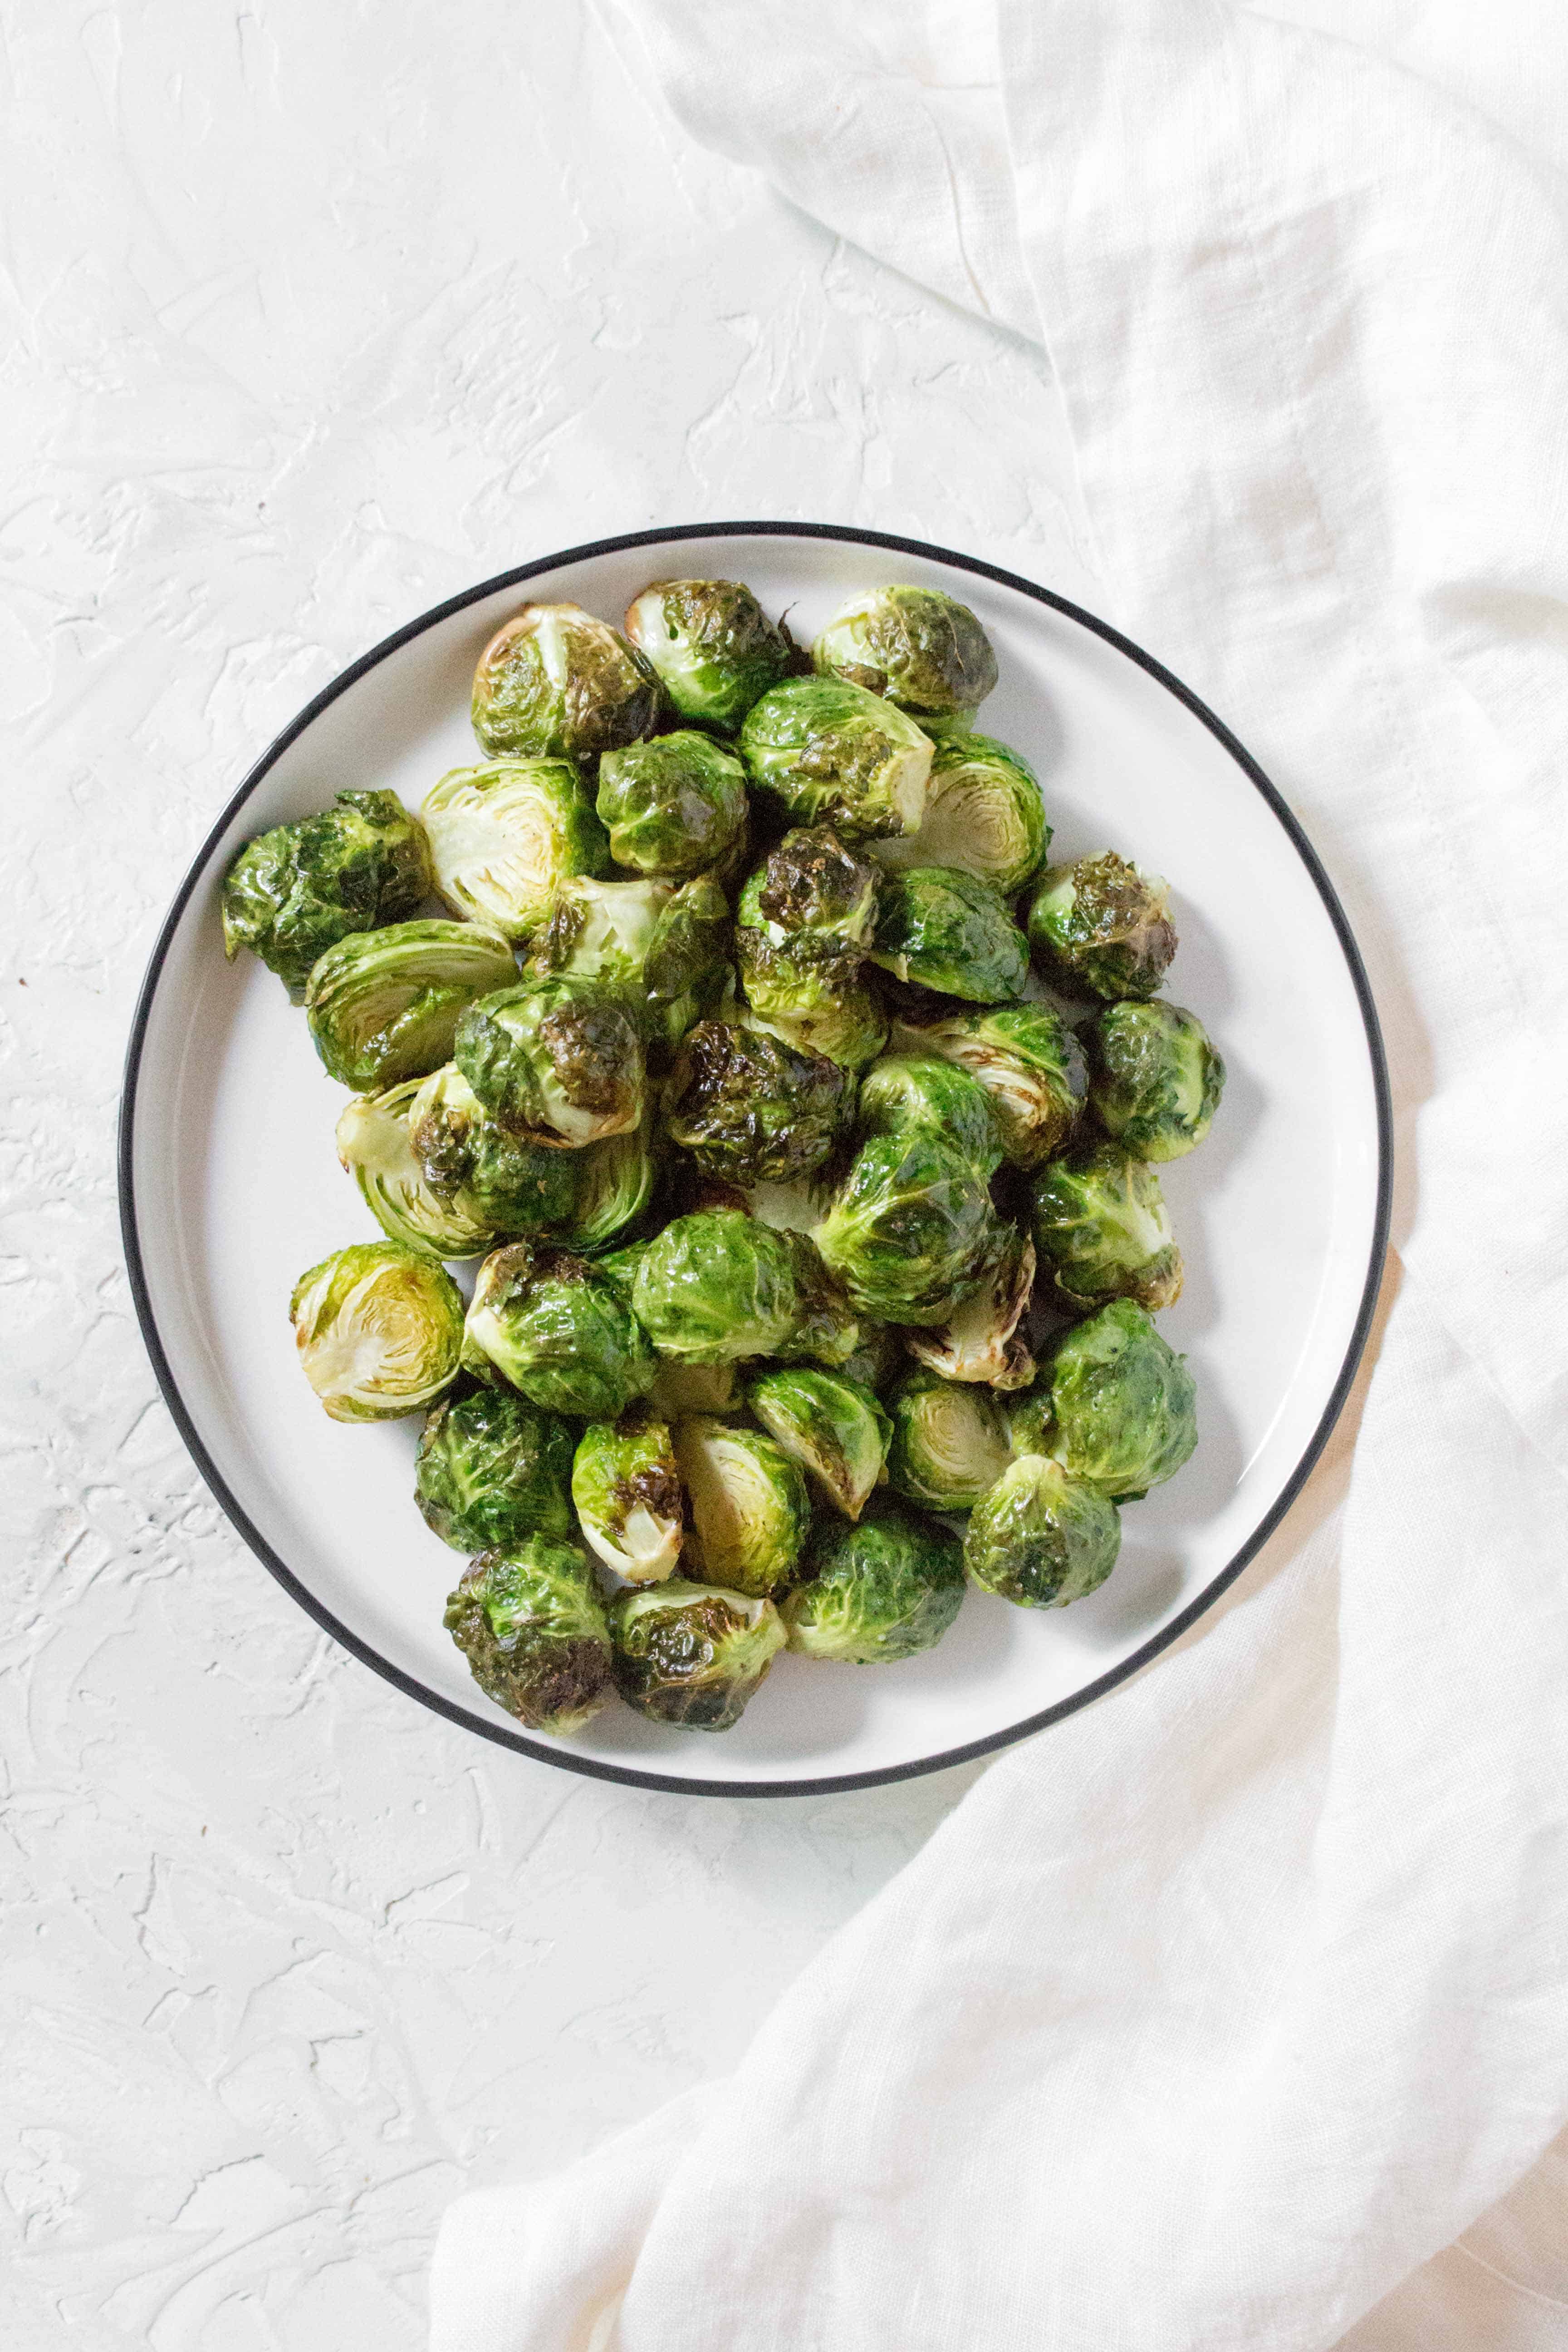 Crispy on the outside, and perfectly tender on the inside, these air fryer Brussels sprouts are going to be a hit! Here's how to make Crispy Air Fryer Brussels Sprouts!